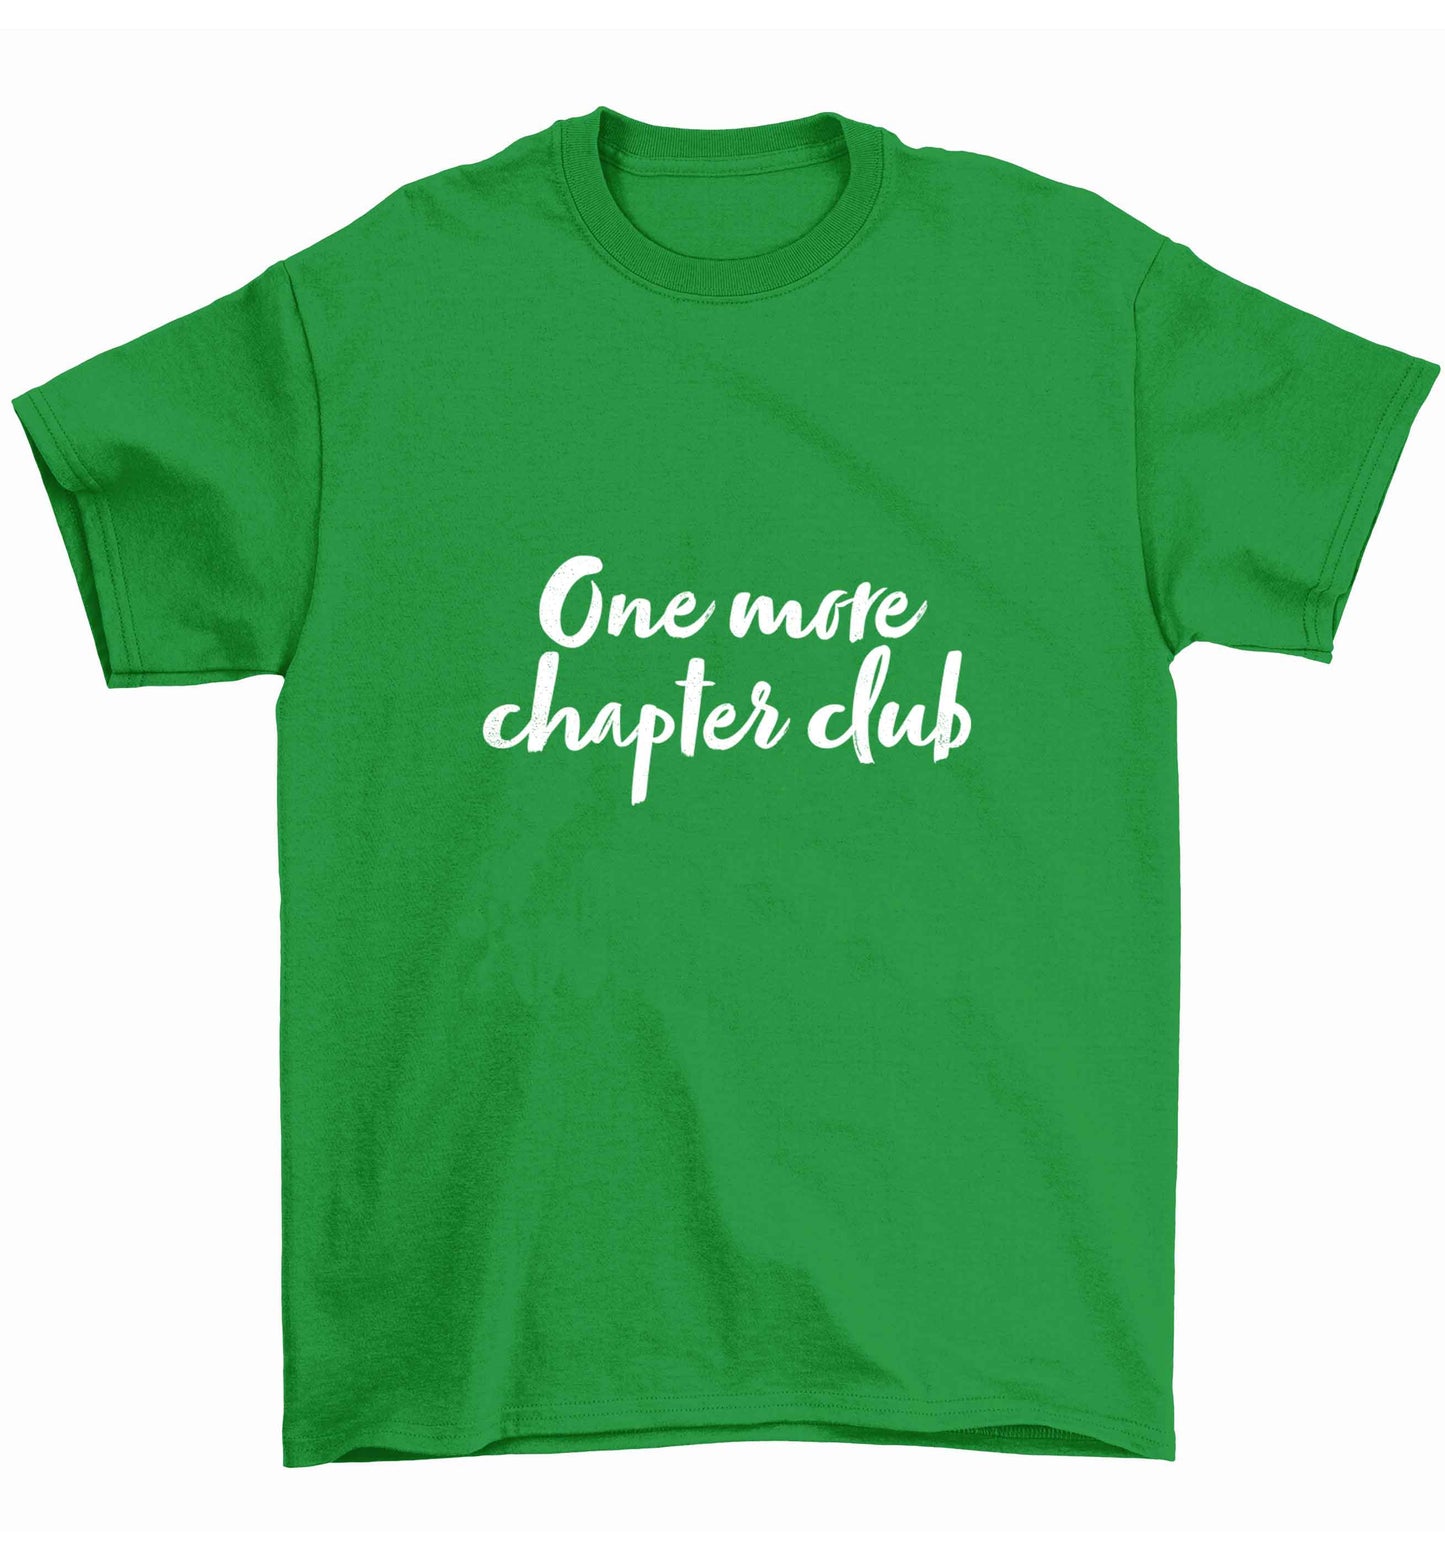 One more chapter club Kit Children's green Tshirt 12-13 Years